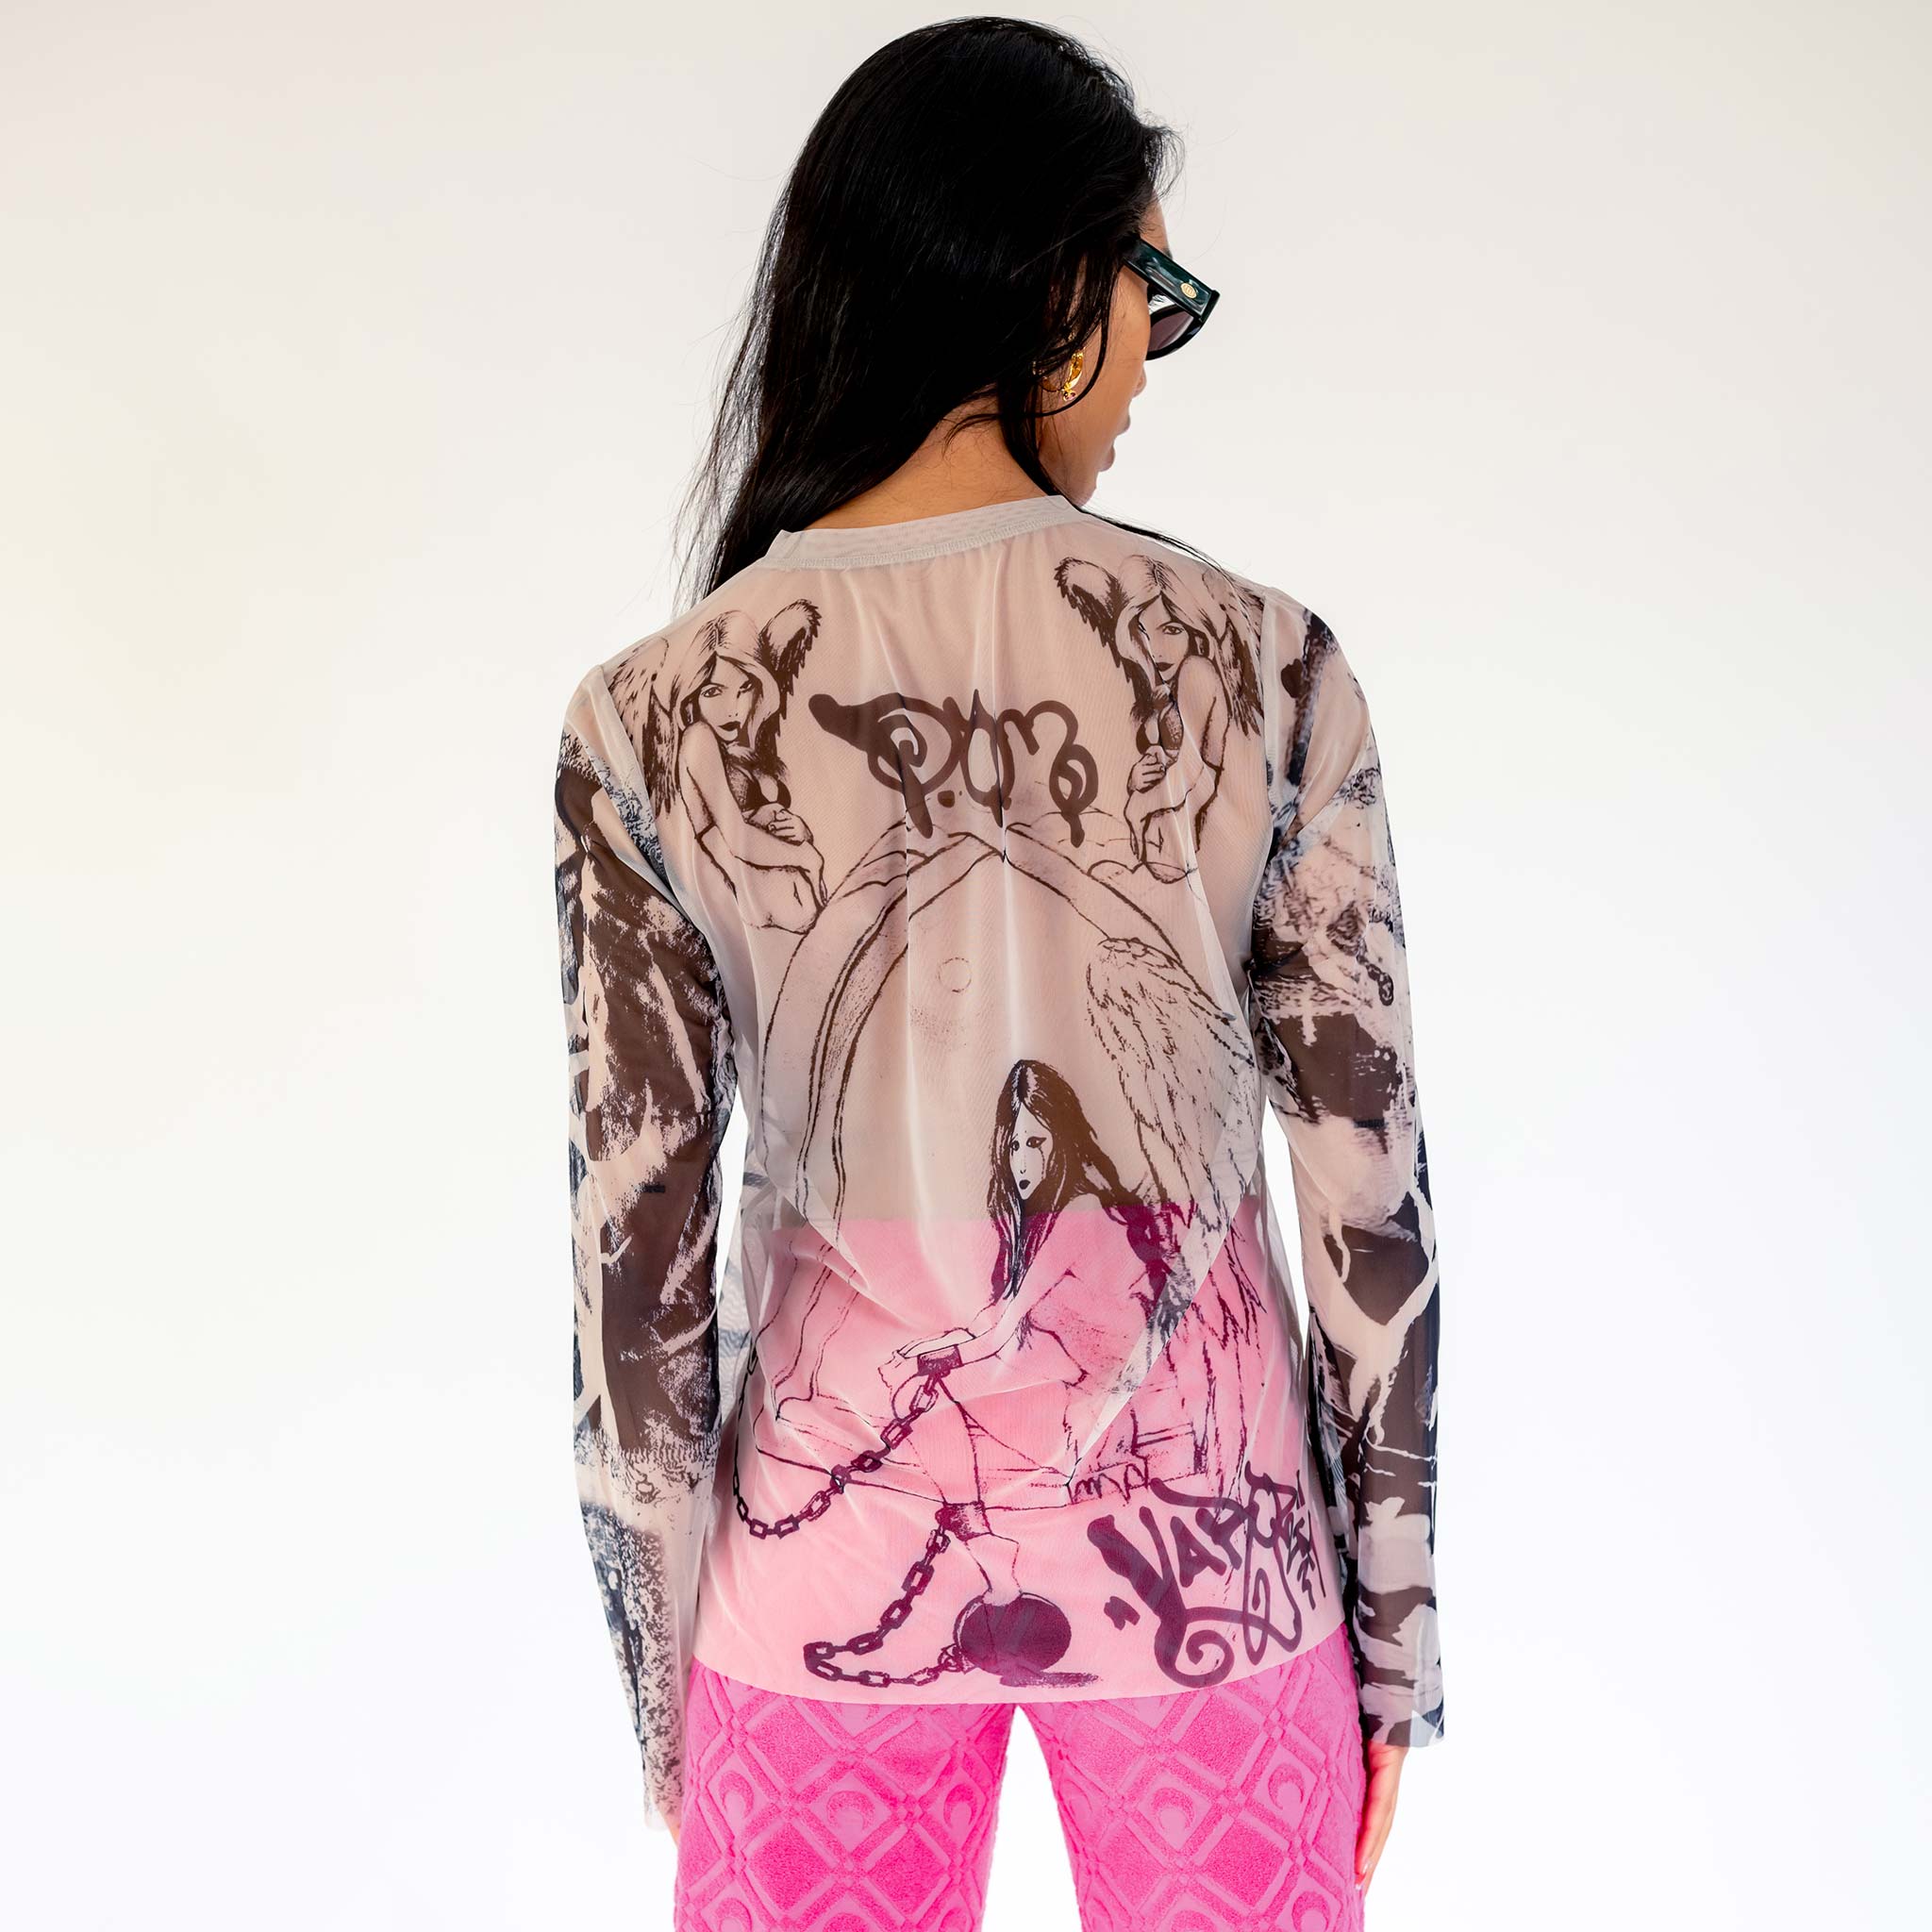 A model wears the semi-sheer Varg 2.0 Mesh Tattoo longsleeve unisex t-shirt with an elaborate all over graphic print inspired by tattoos, back view.